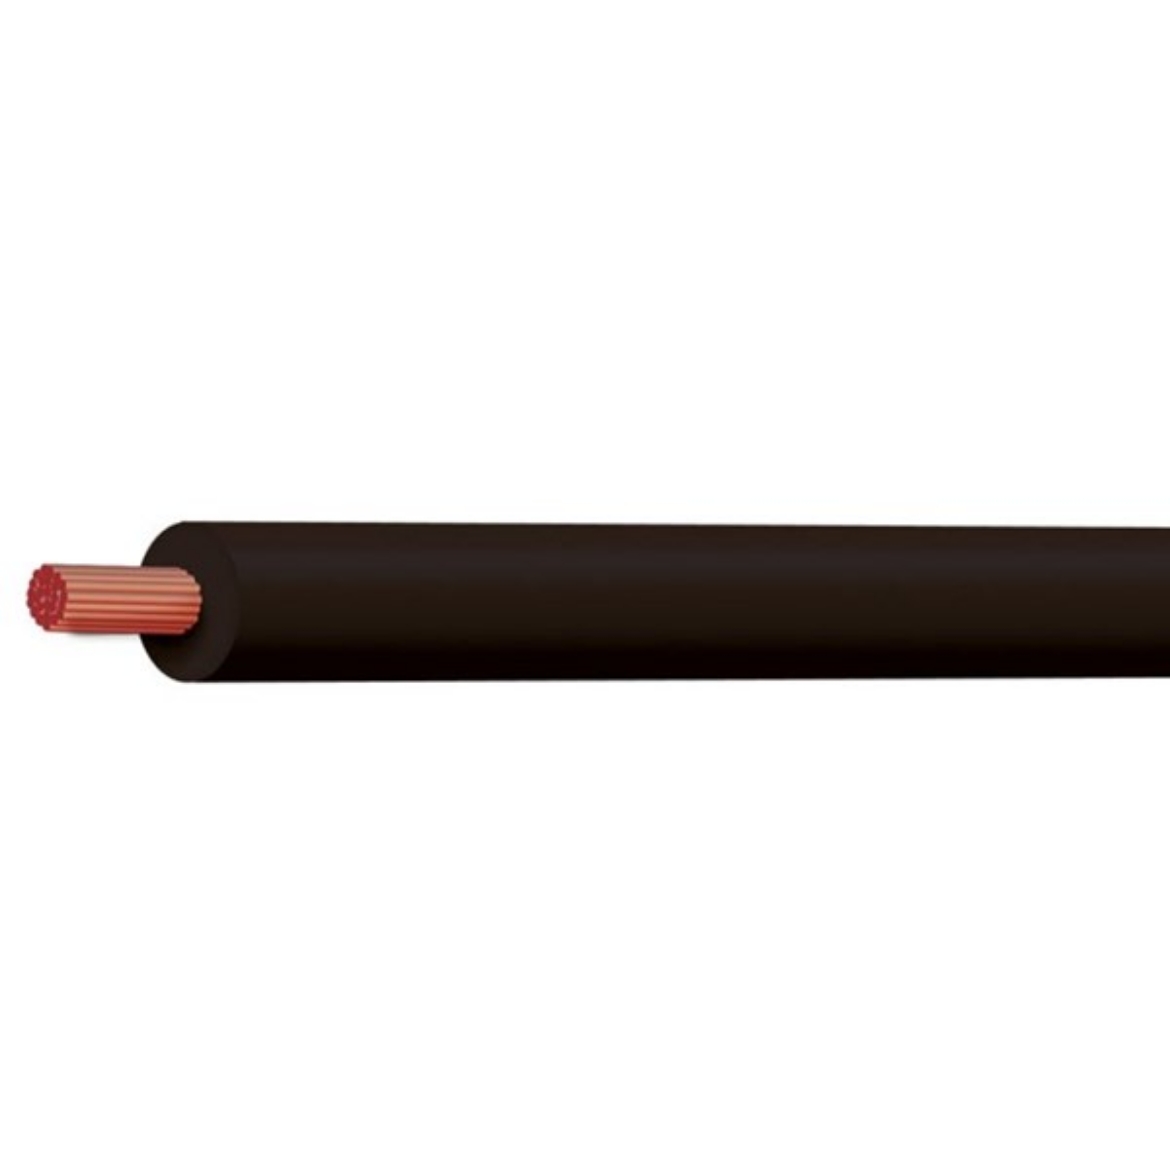 Picture of CABLE BATTERY BLACK 00 B&S 64MM - 30M ROLL